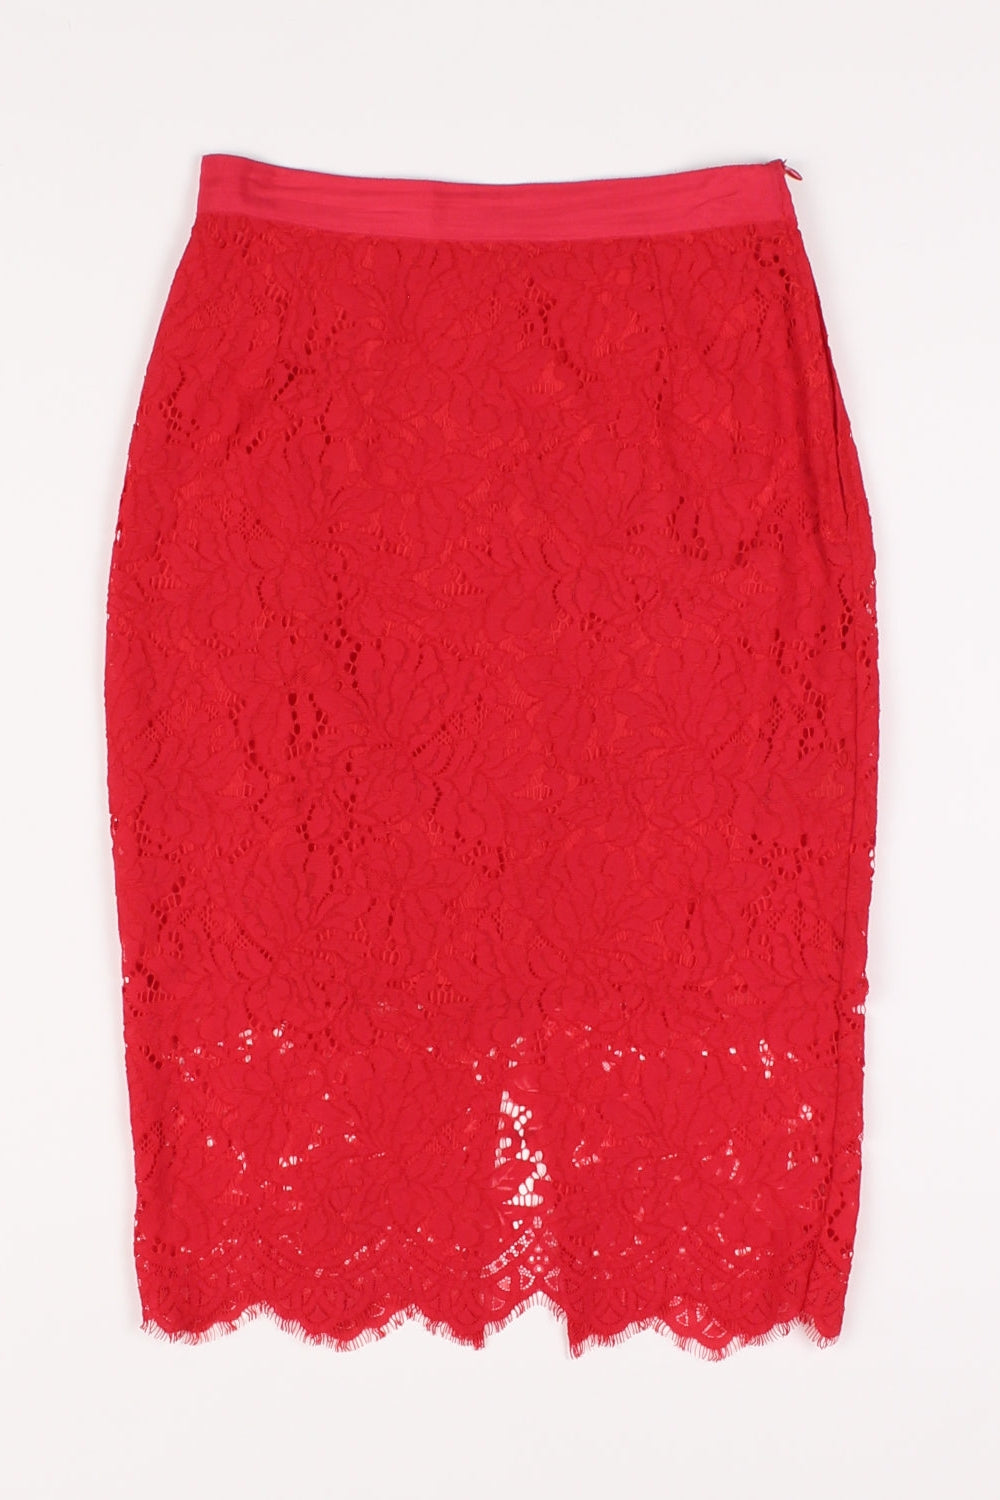 H&M Red Lace Midi Skirt 8